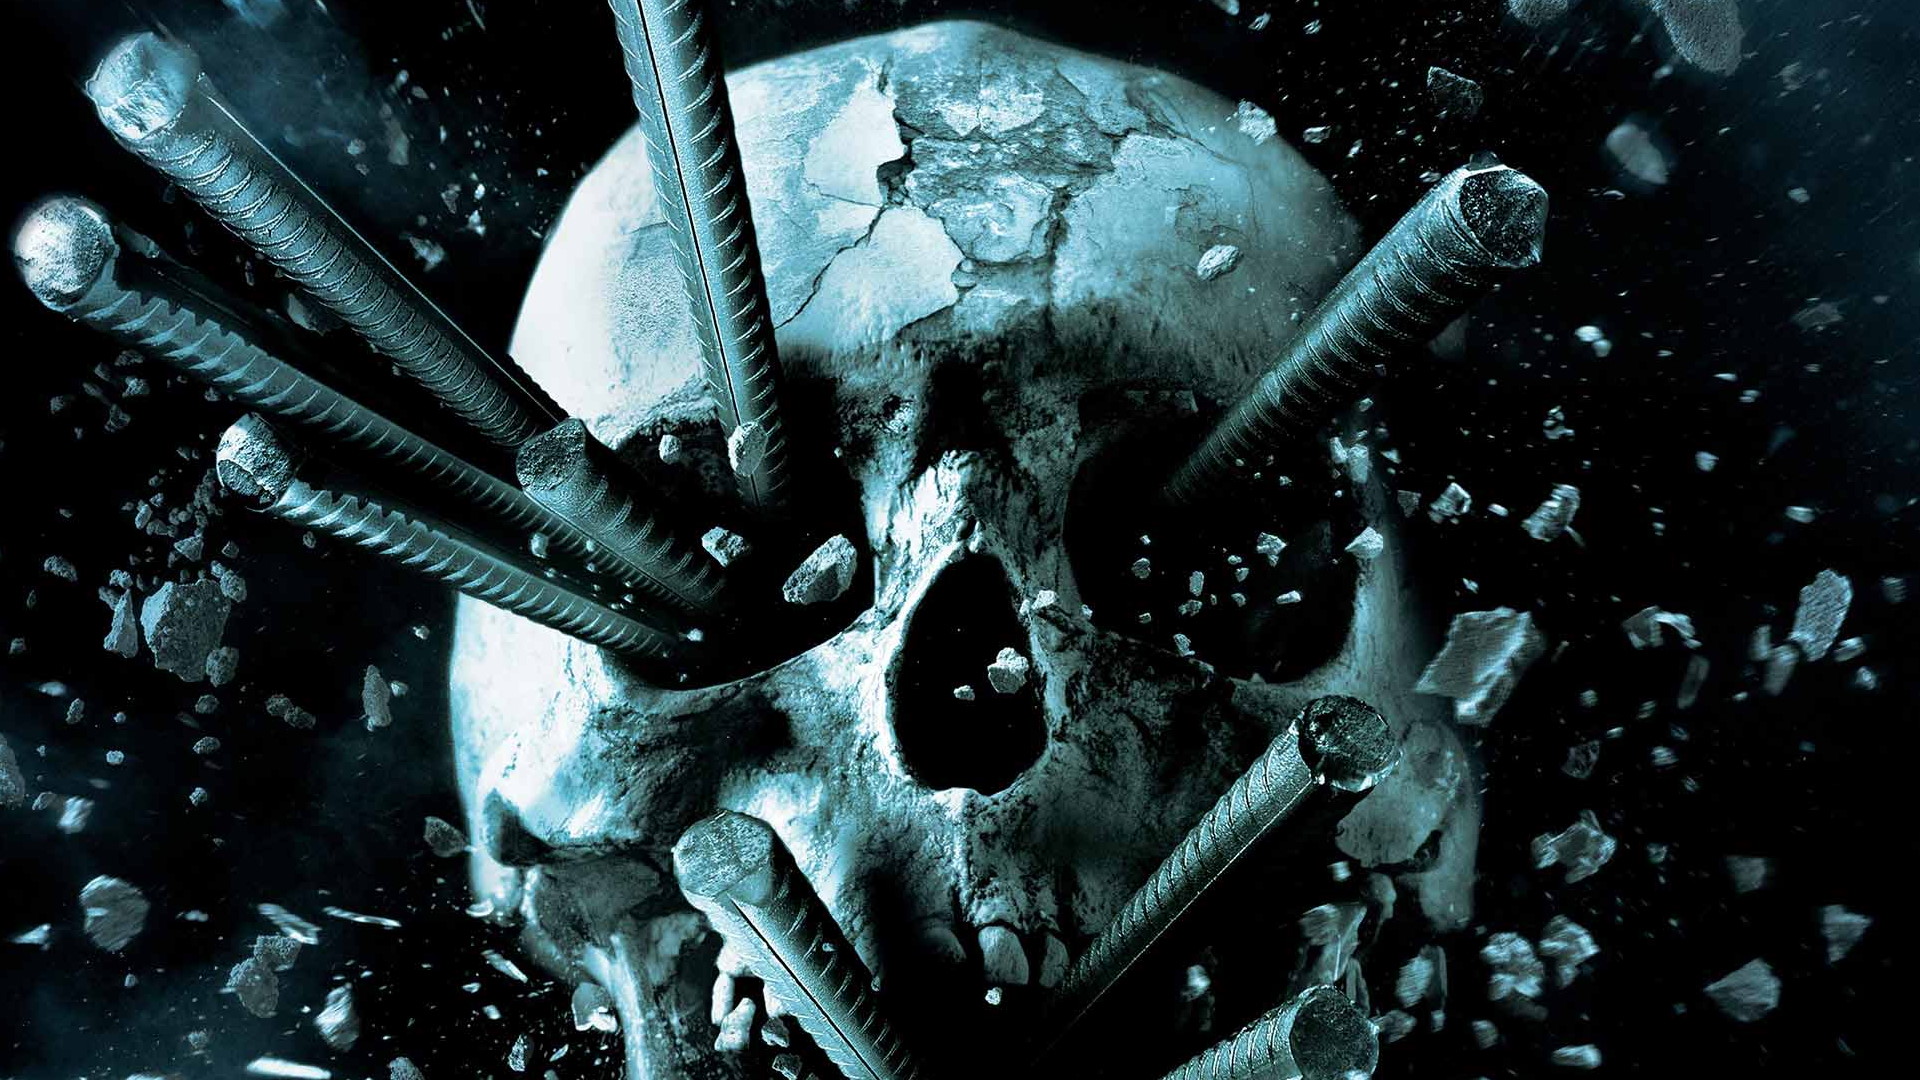 Spider-Man 3 director goes from superheroes to horror with Final Destination 6 thumbnail